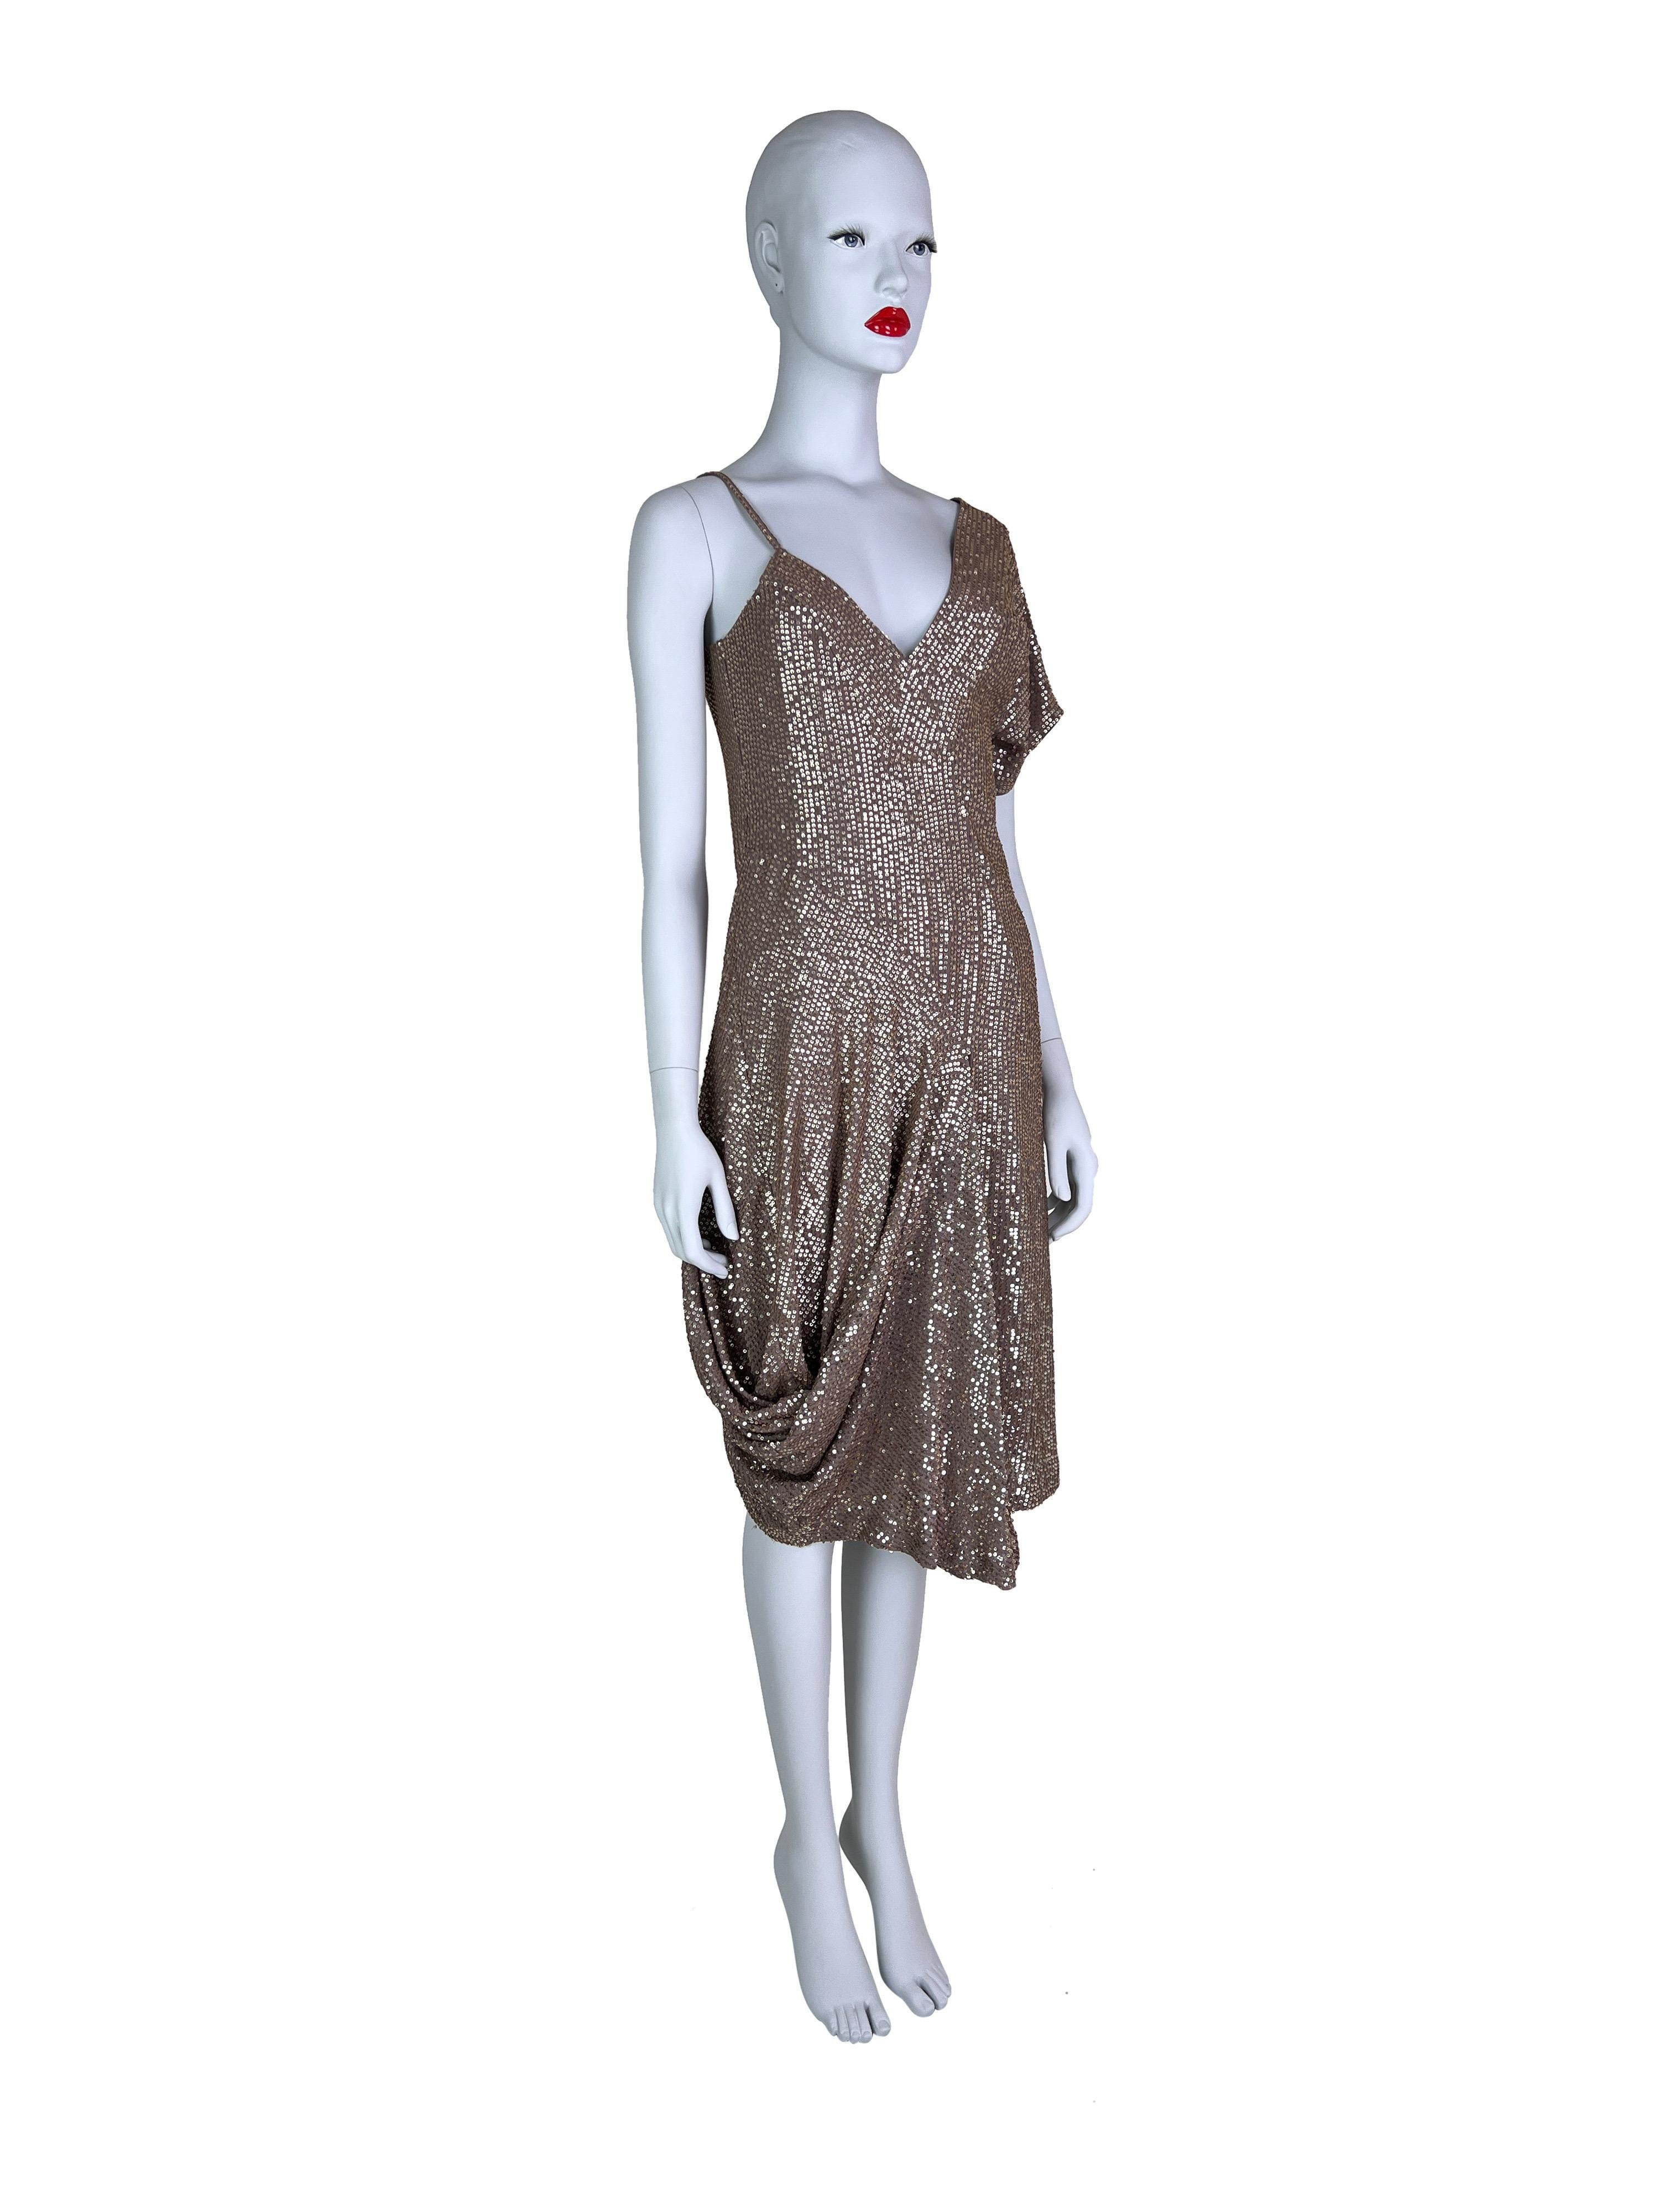 Dior by John Galliano Resort 2007 Sequin Dress In Excellent Condition For Sale In Prague, CZ